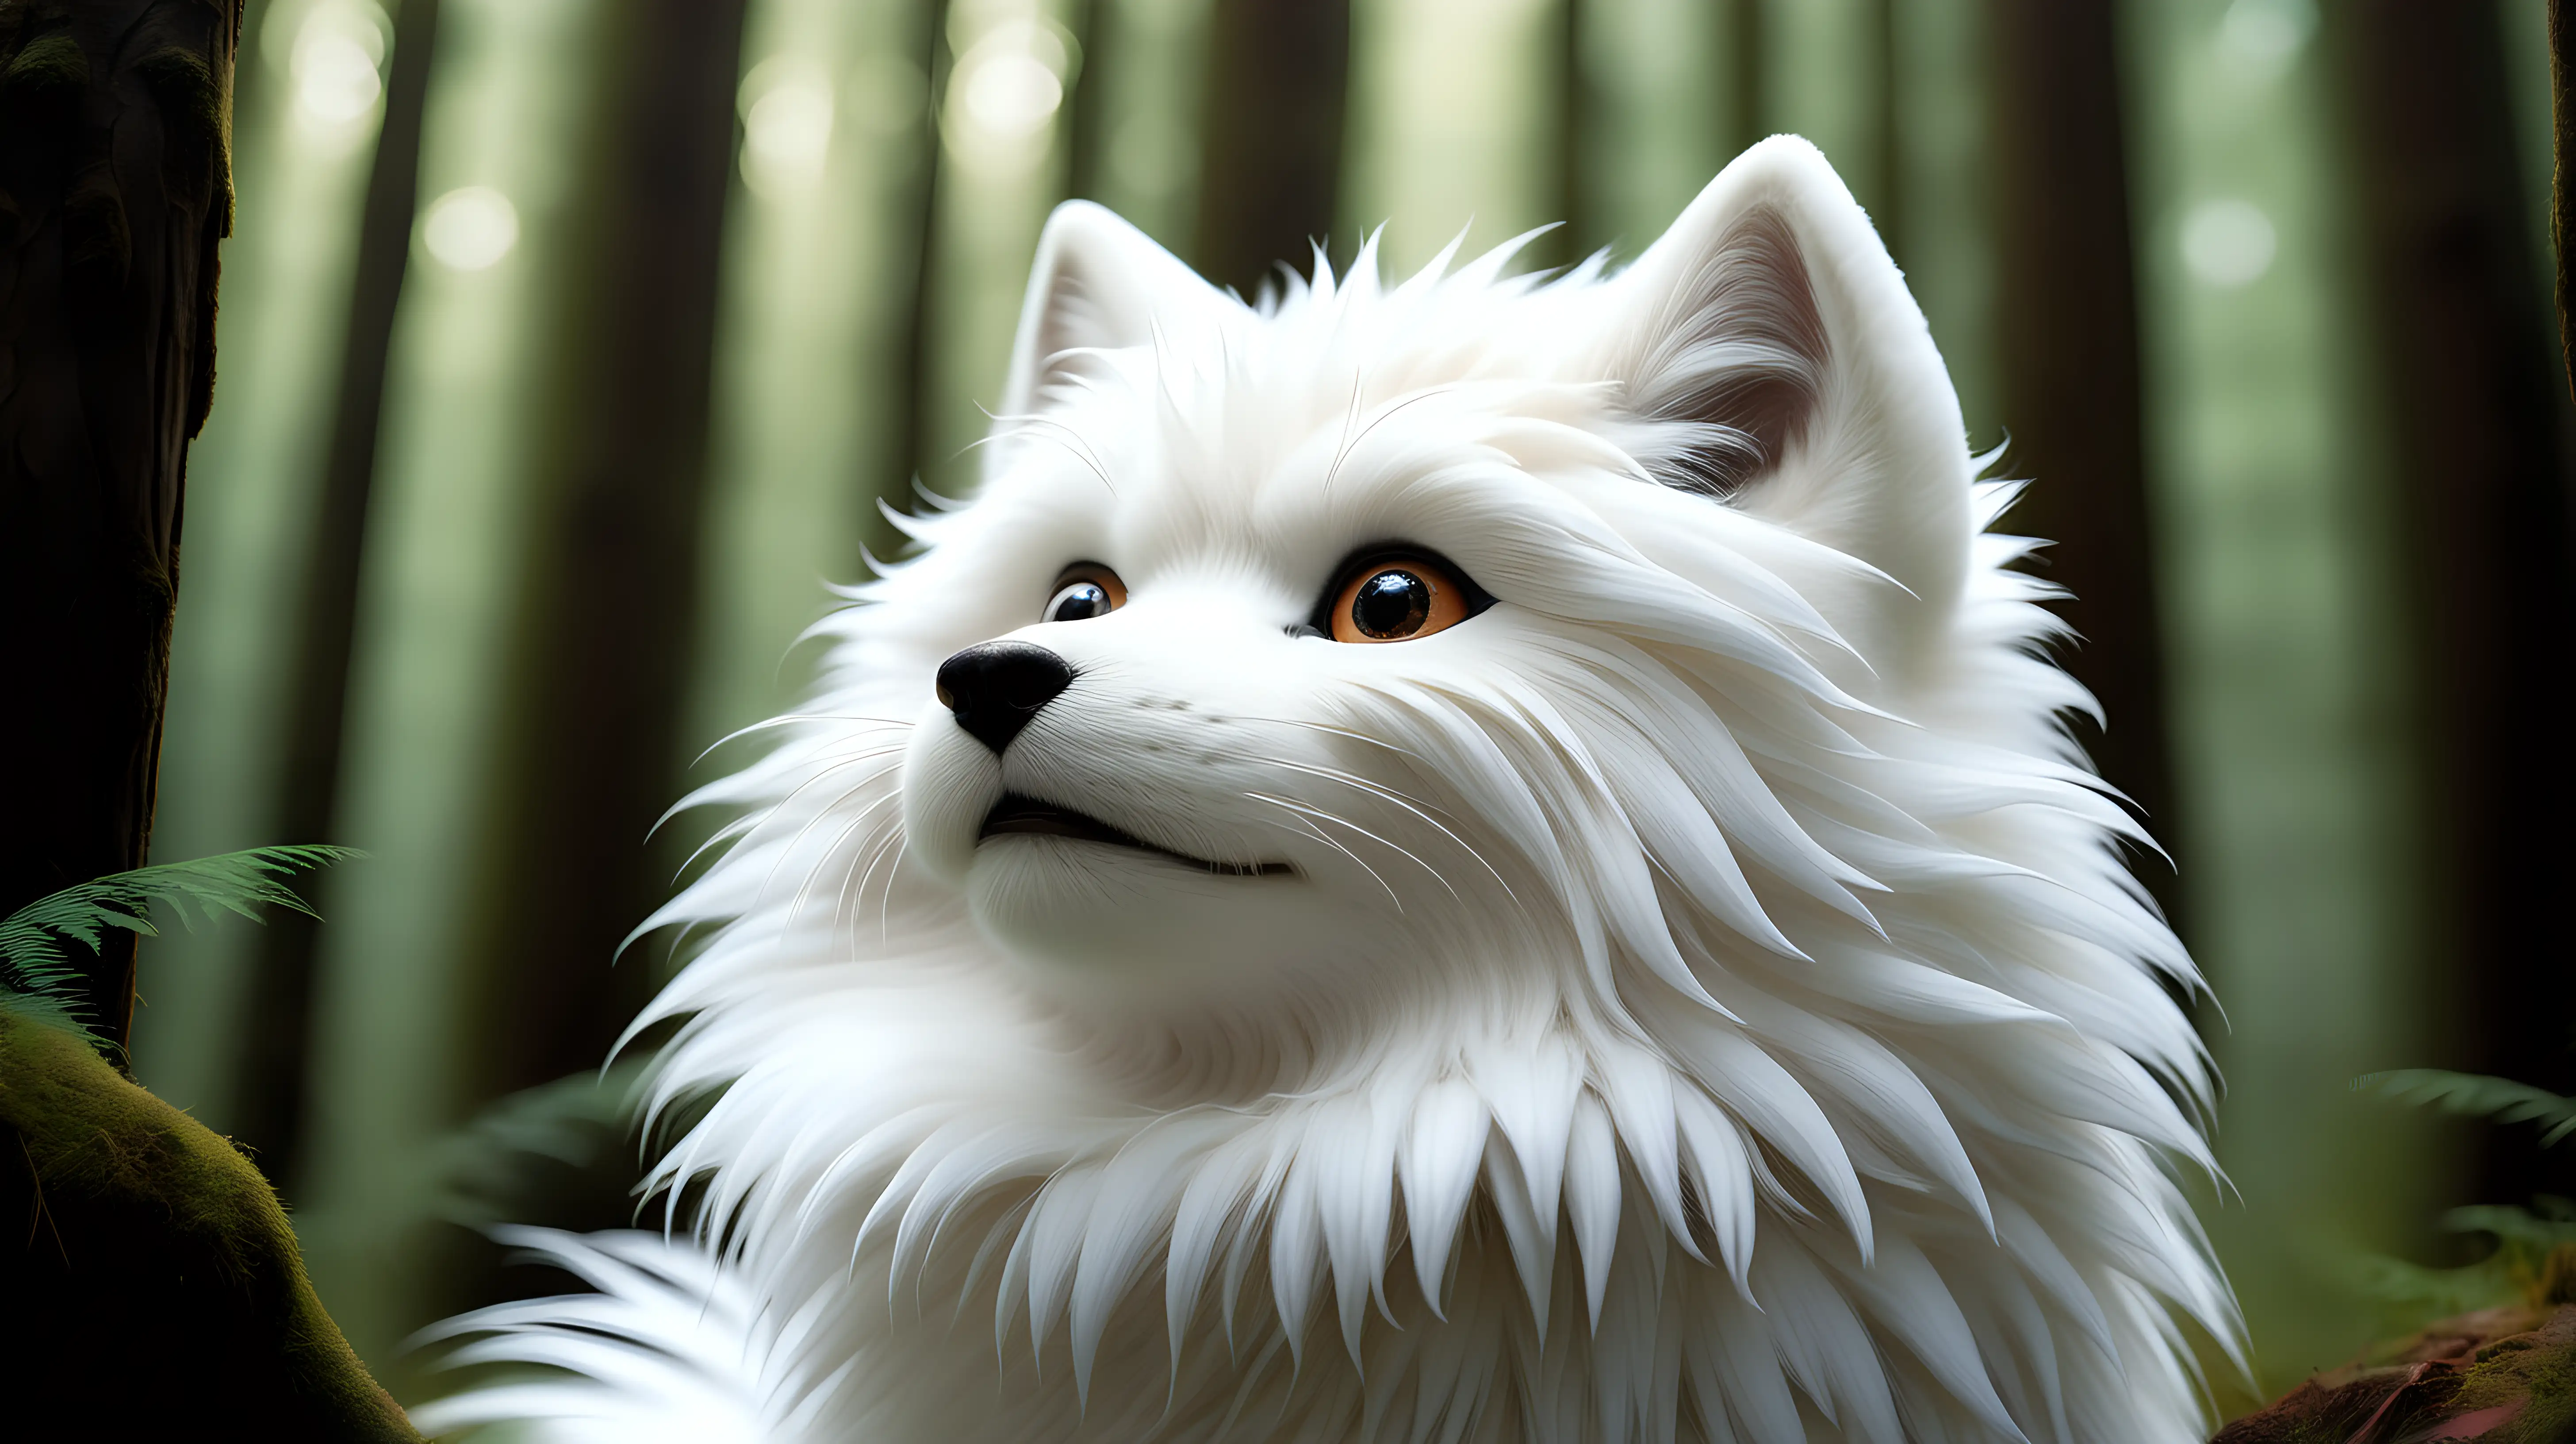 Majestic Tasho with White Fur Gazing at the Enchanting Sky in the Magical Forest